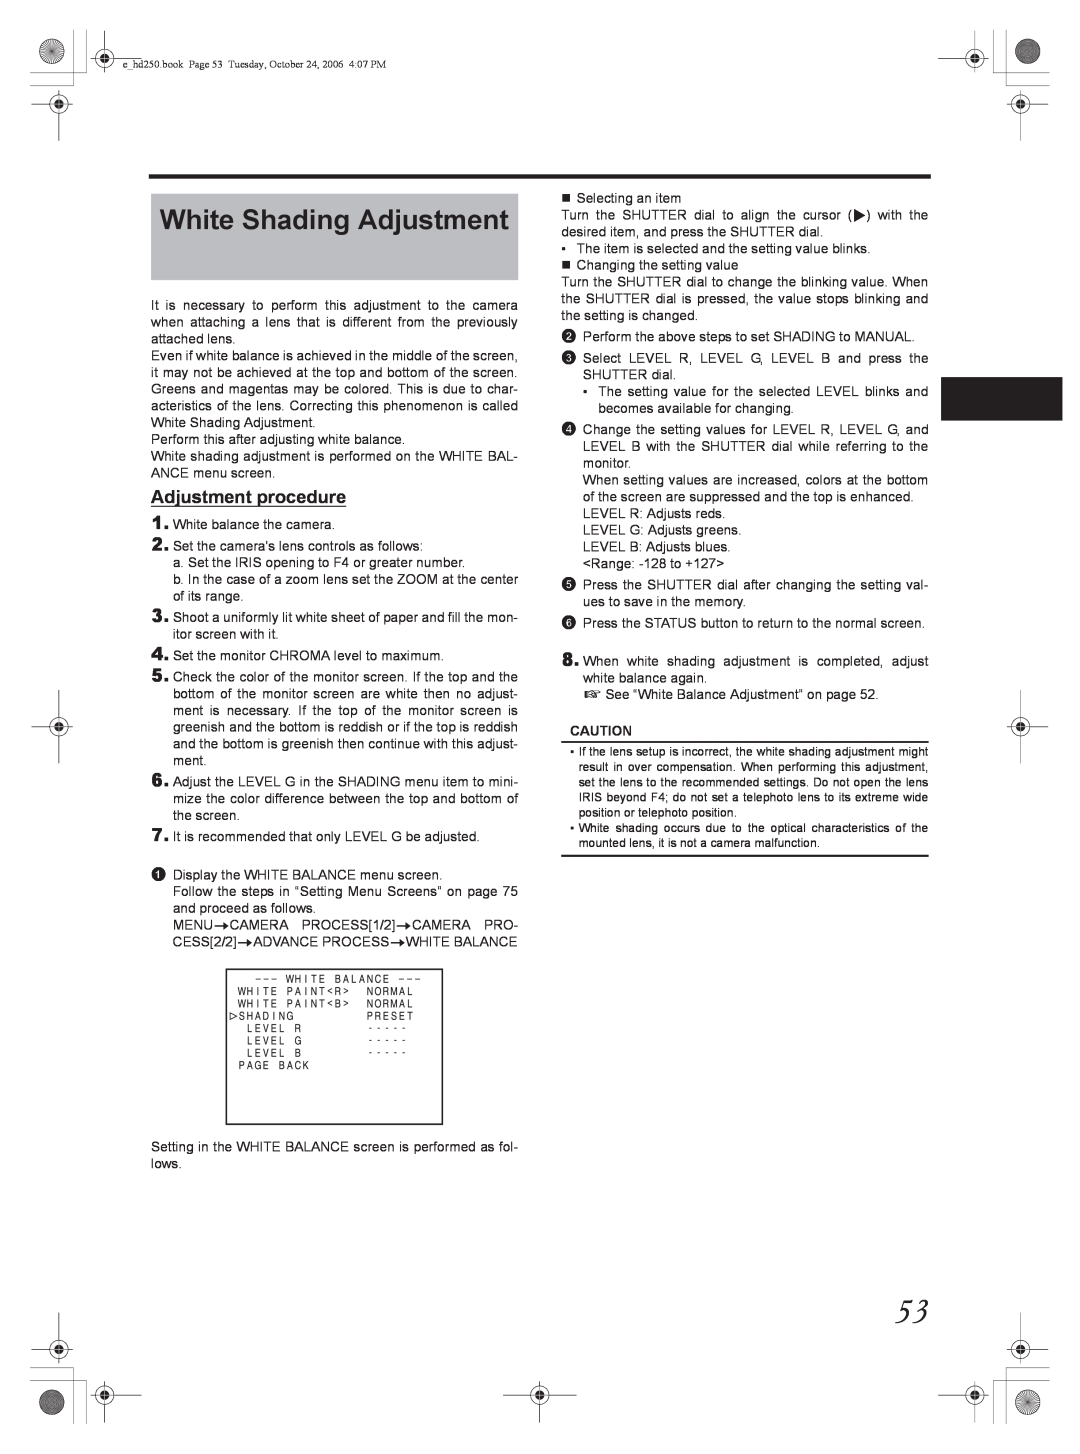 JVC GY-HD251 manual White Shading Adjustment, Adjustment procedure, ehd250.book Page 53 Tuesday, October 24, 2006 407 PM 